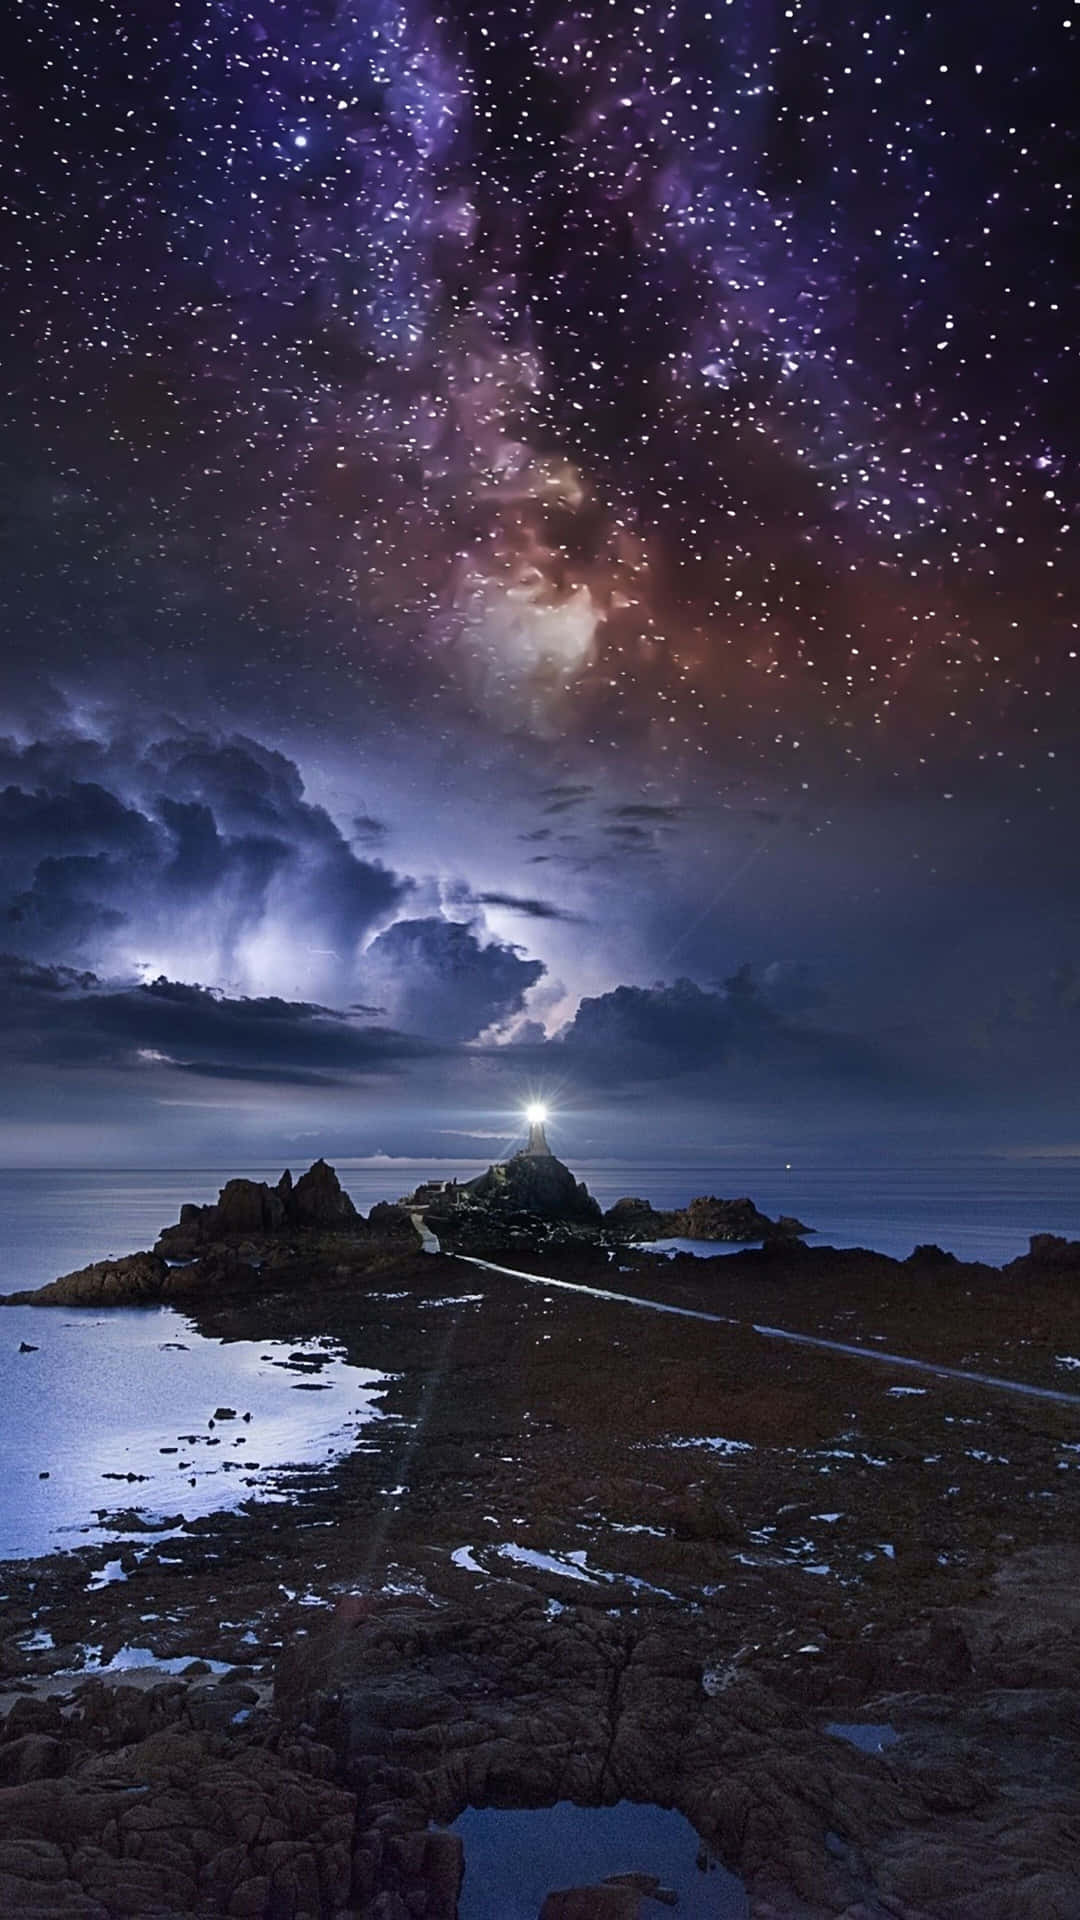 Star Sky With A Lighthouse Wallpaper